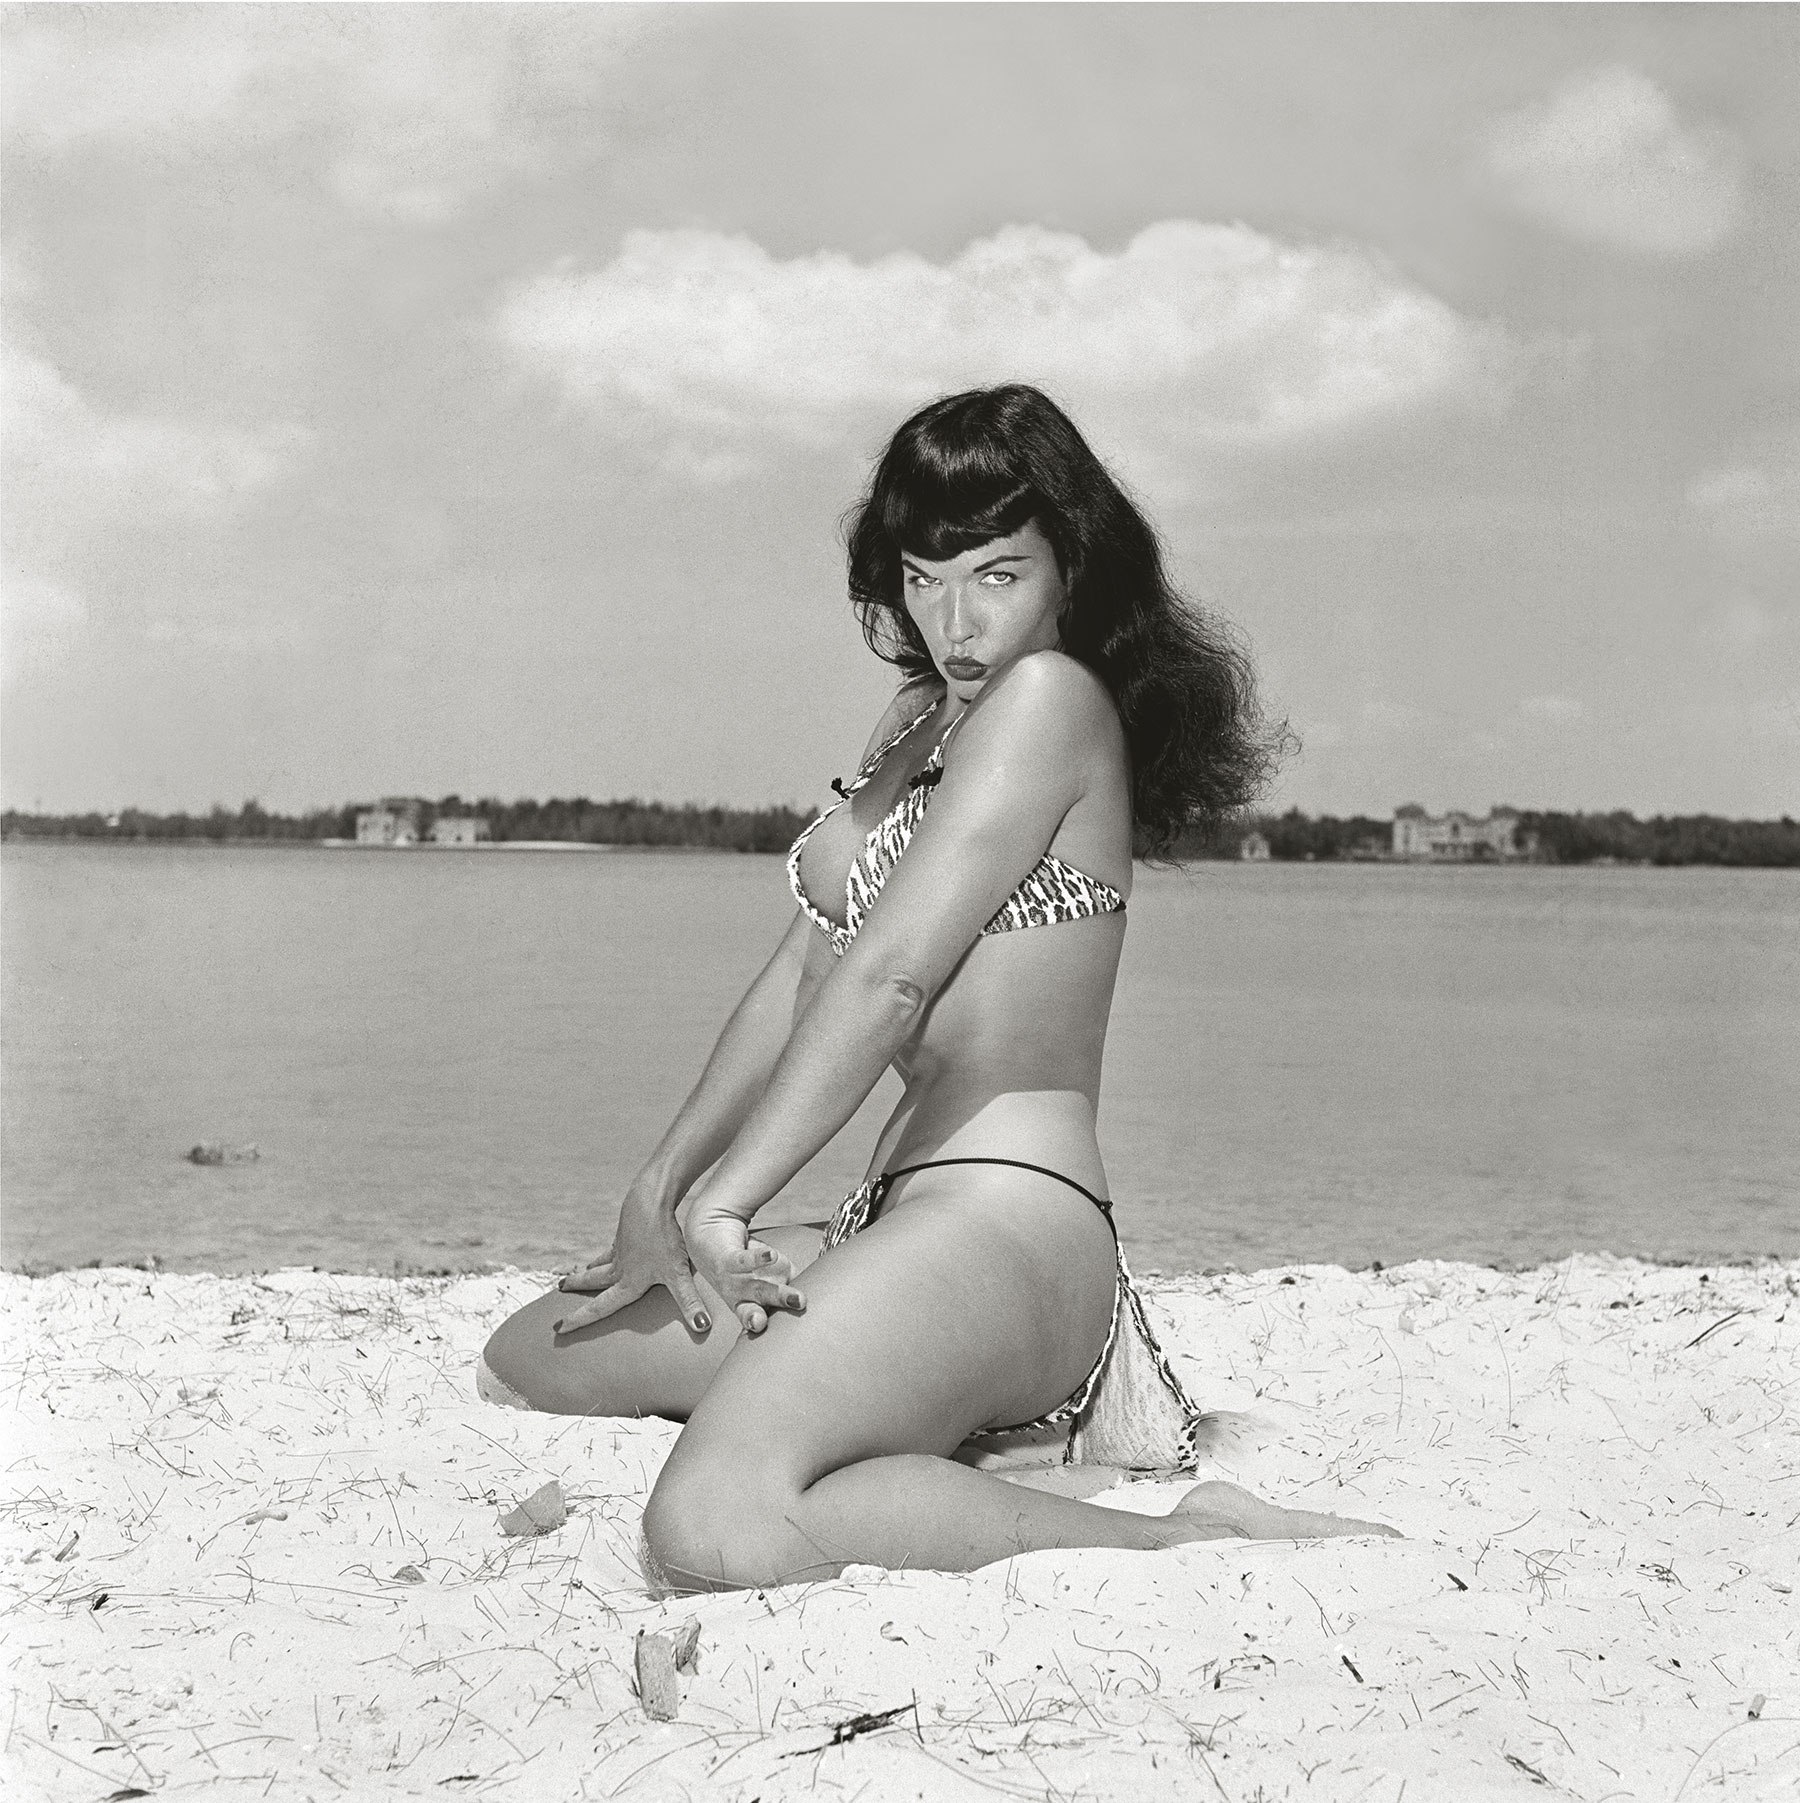 Bunny Yeager (1929 -2014) is the legendary photographer, model, swimsuit de...